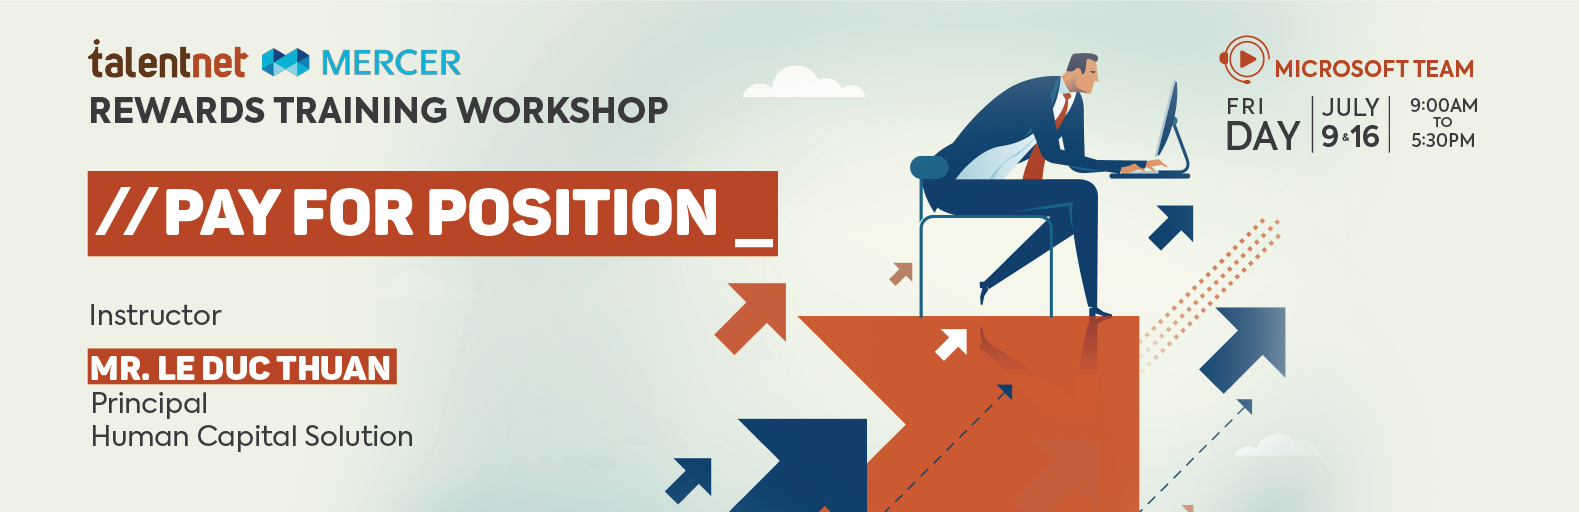 On the 9th of July 2021, the workshop Pay for position will take place to accompany the business people value insight about payment.